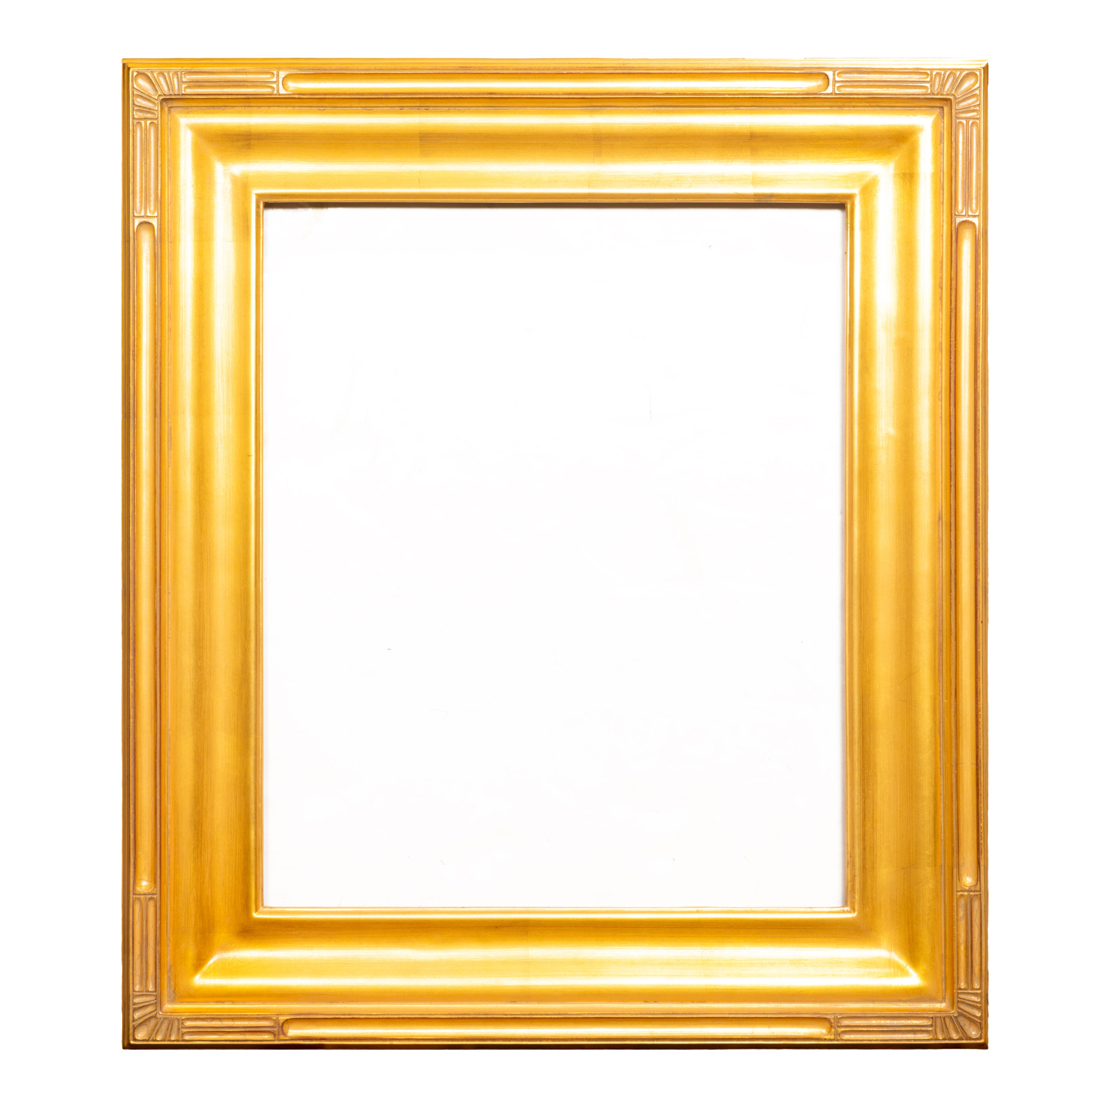 ARTS CRAFTS STYLE GILTWOOD FRAME 3a3945